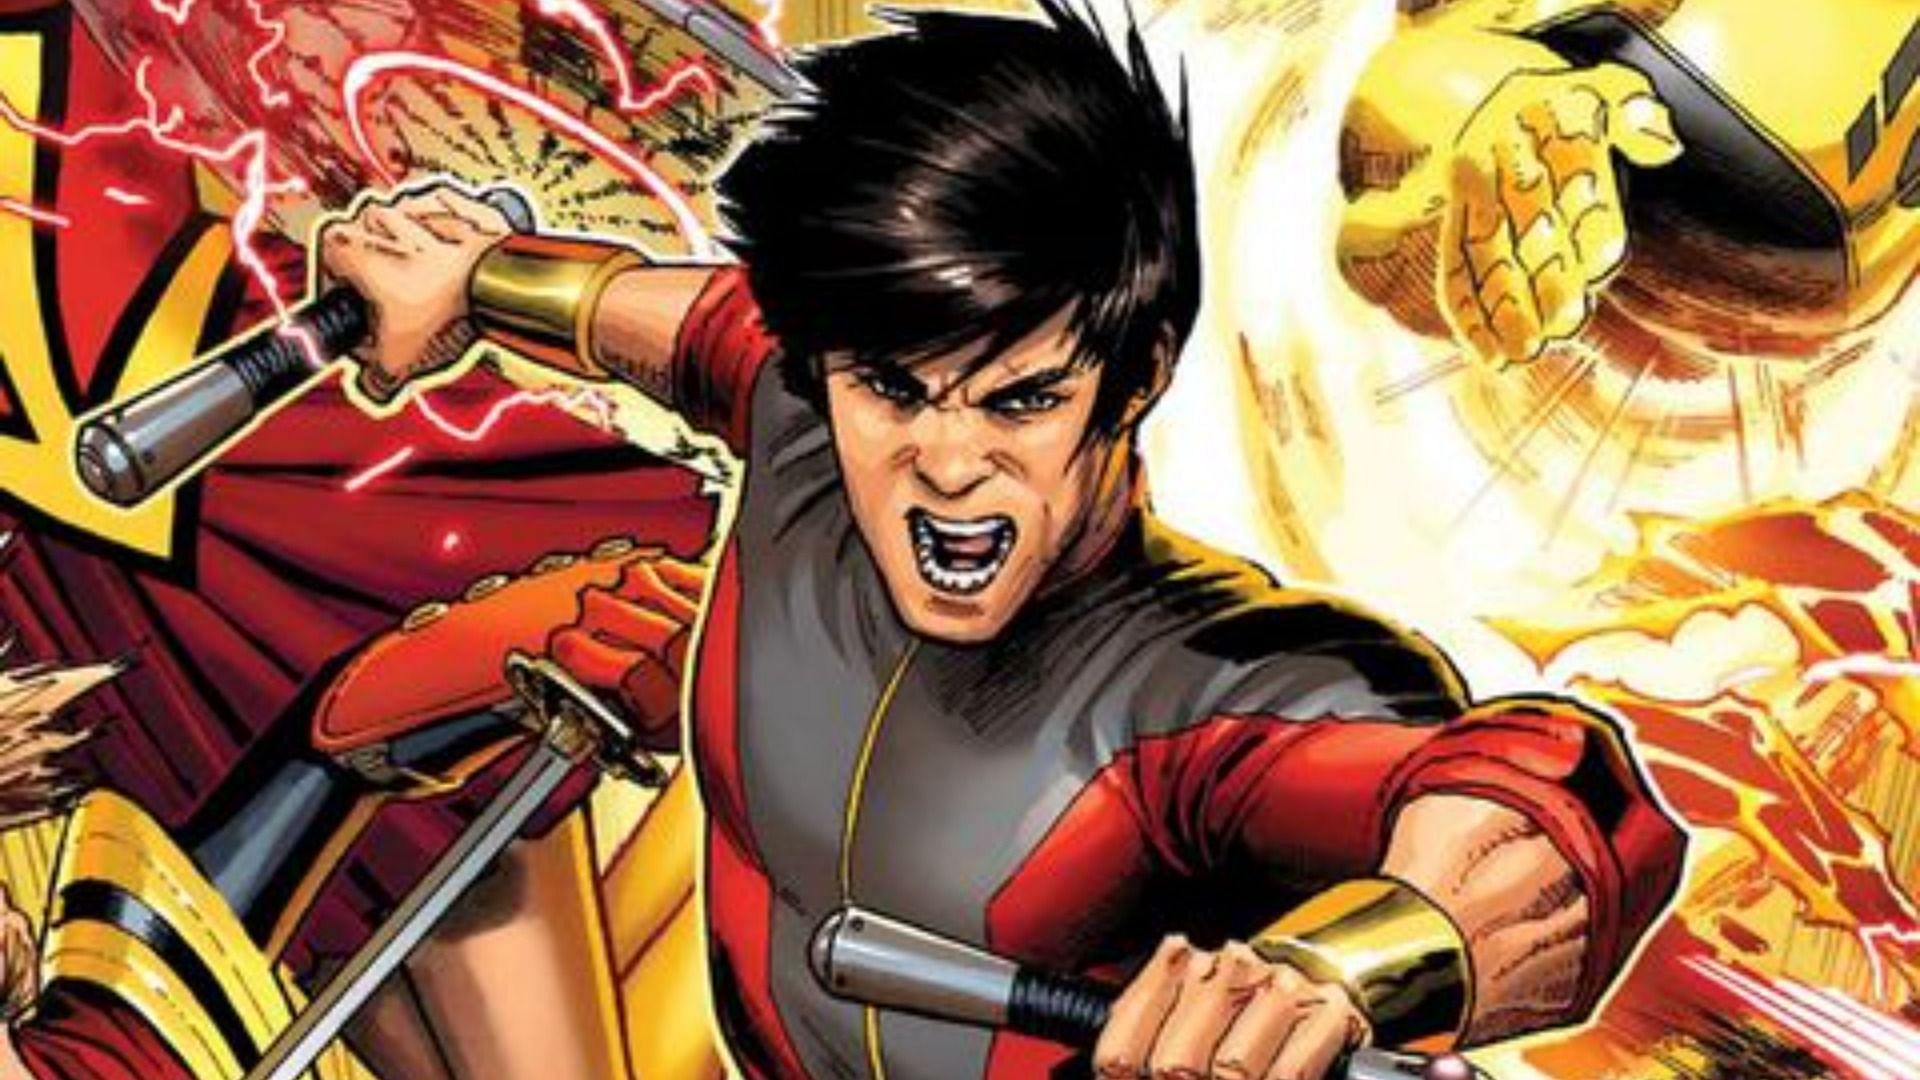 Simu Liu portrayed the role of Shang-Chi in the solo movie adaptation (Image via Marvel)